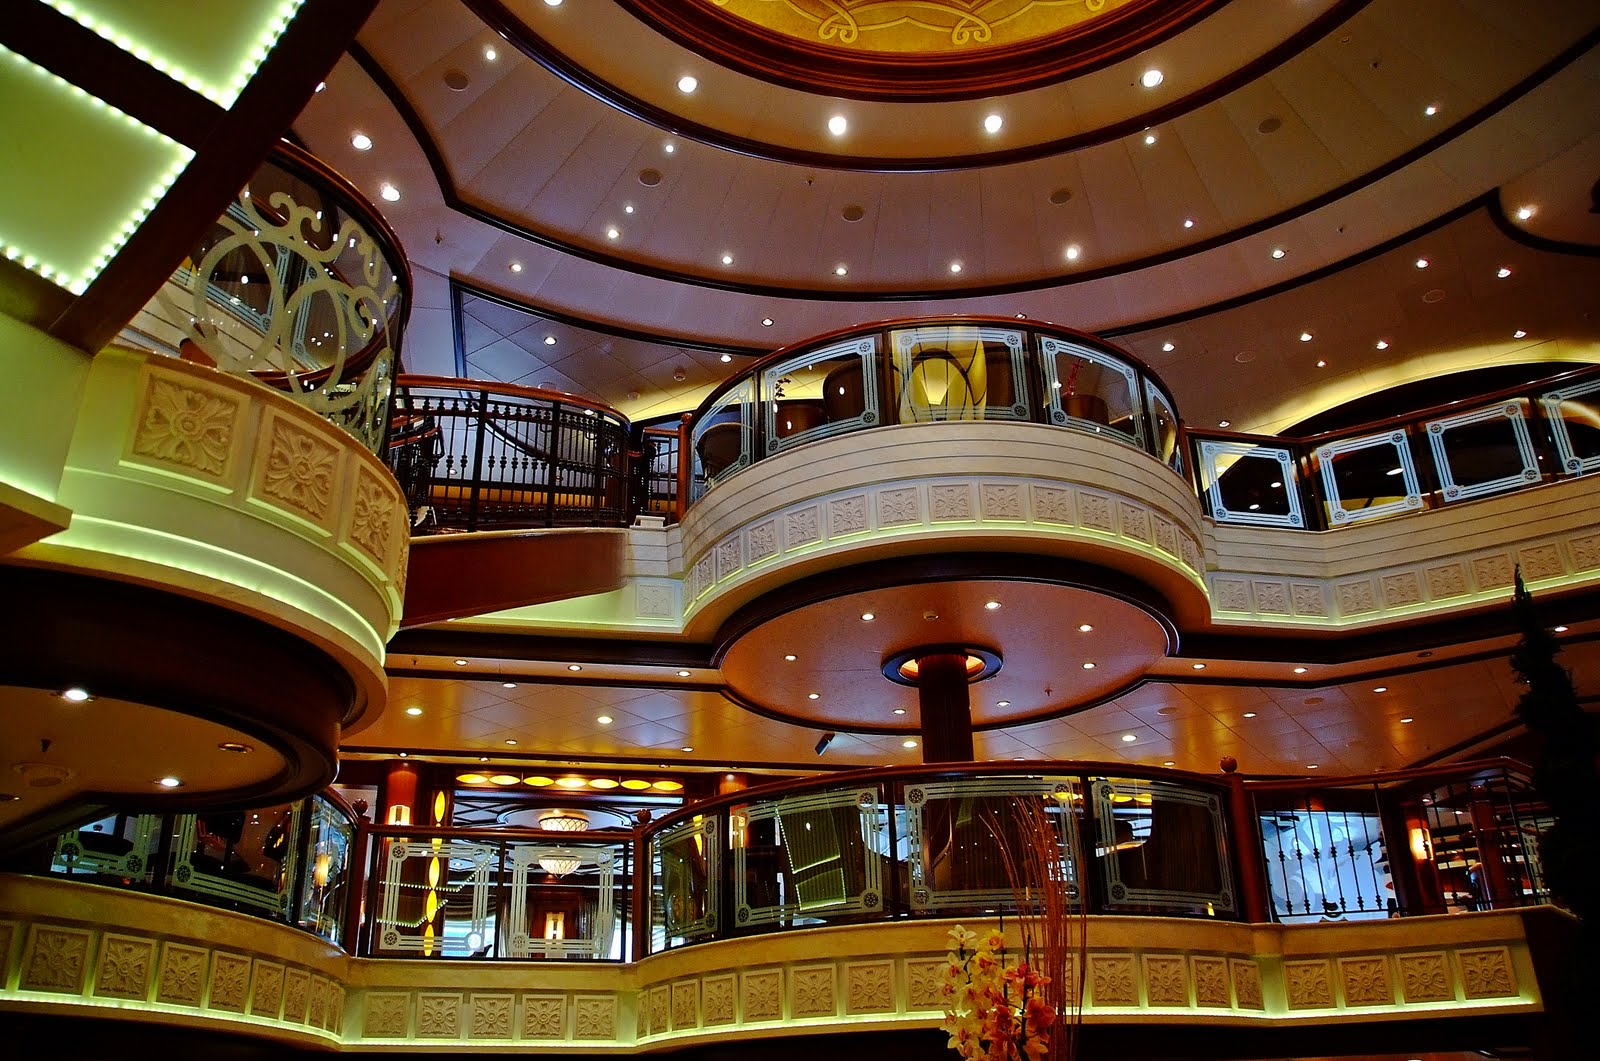 John's Photo Blog: Cunard Queen Victoria Cruise Ship Images Of The Inside